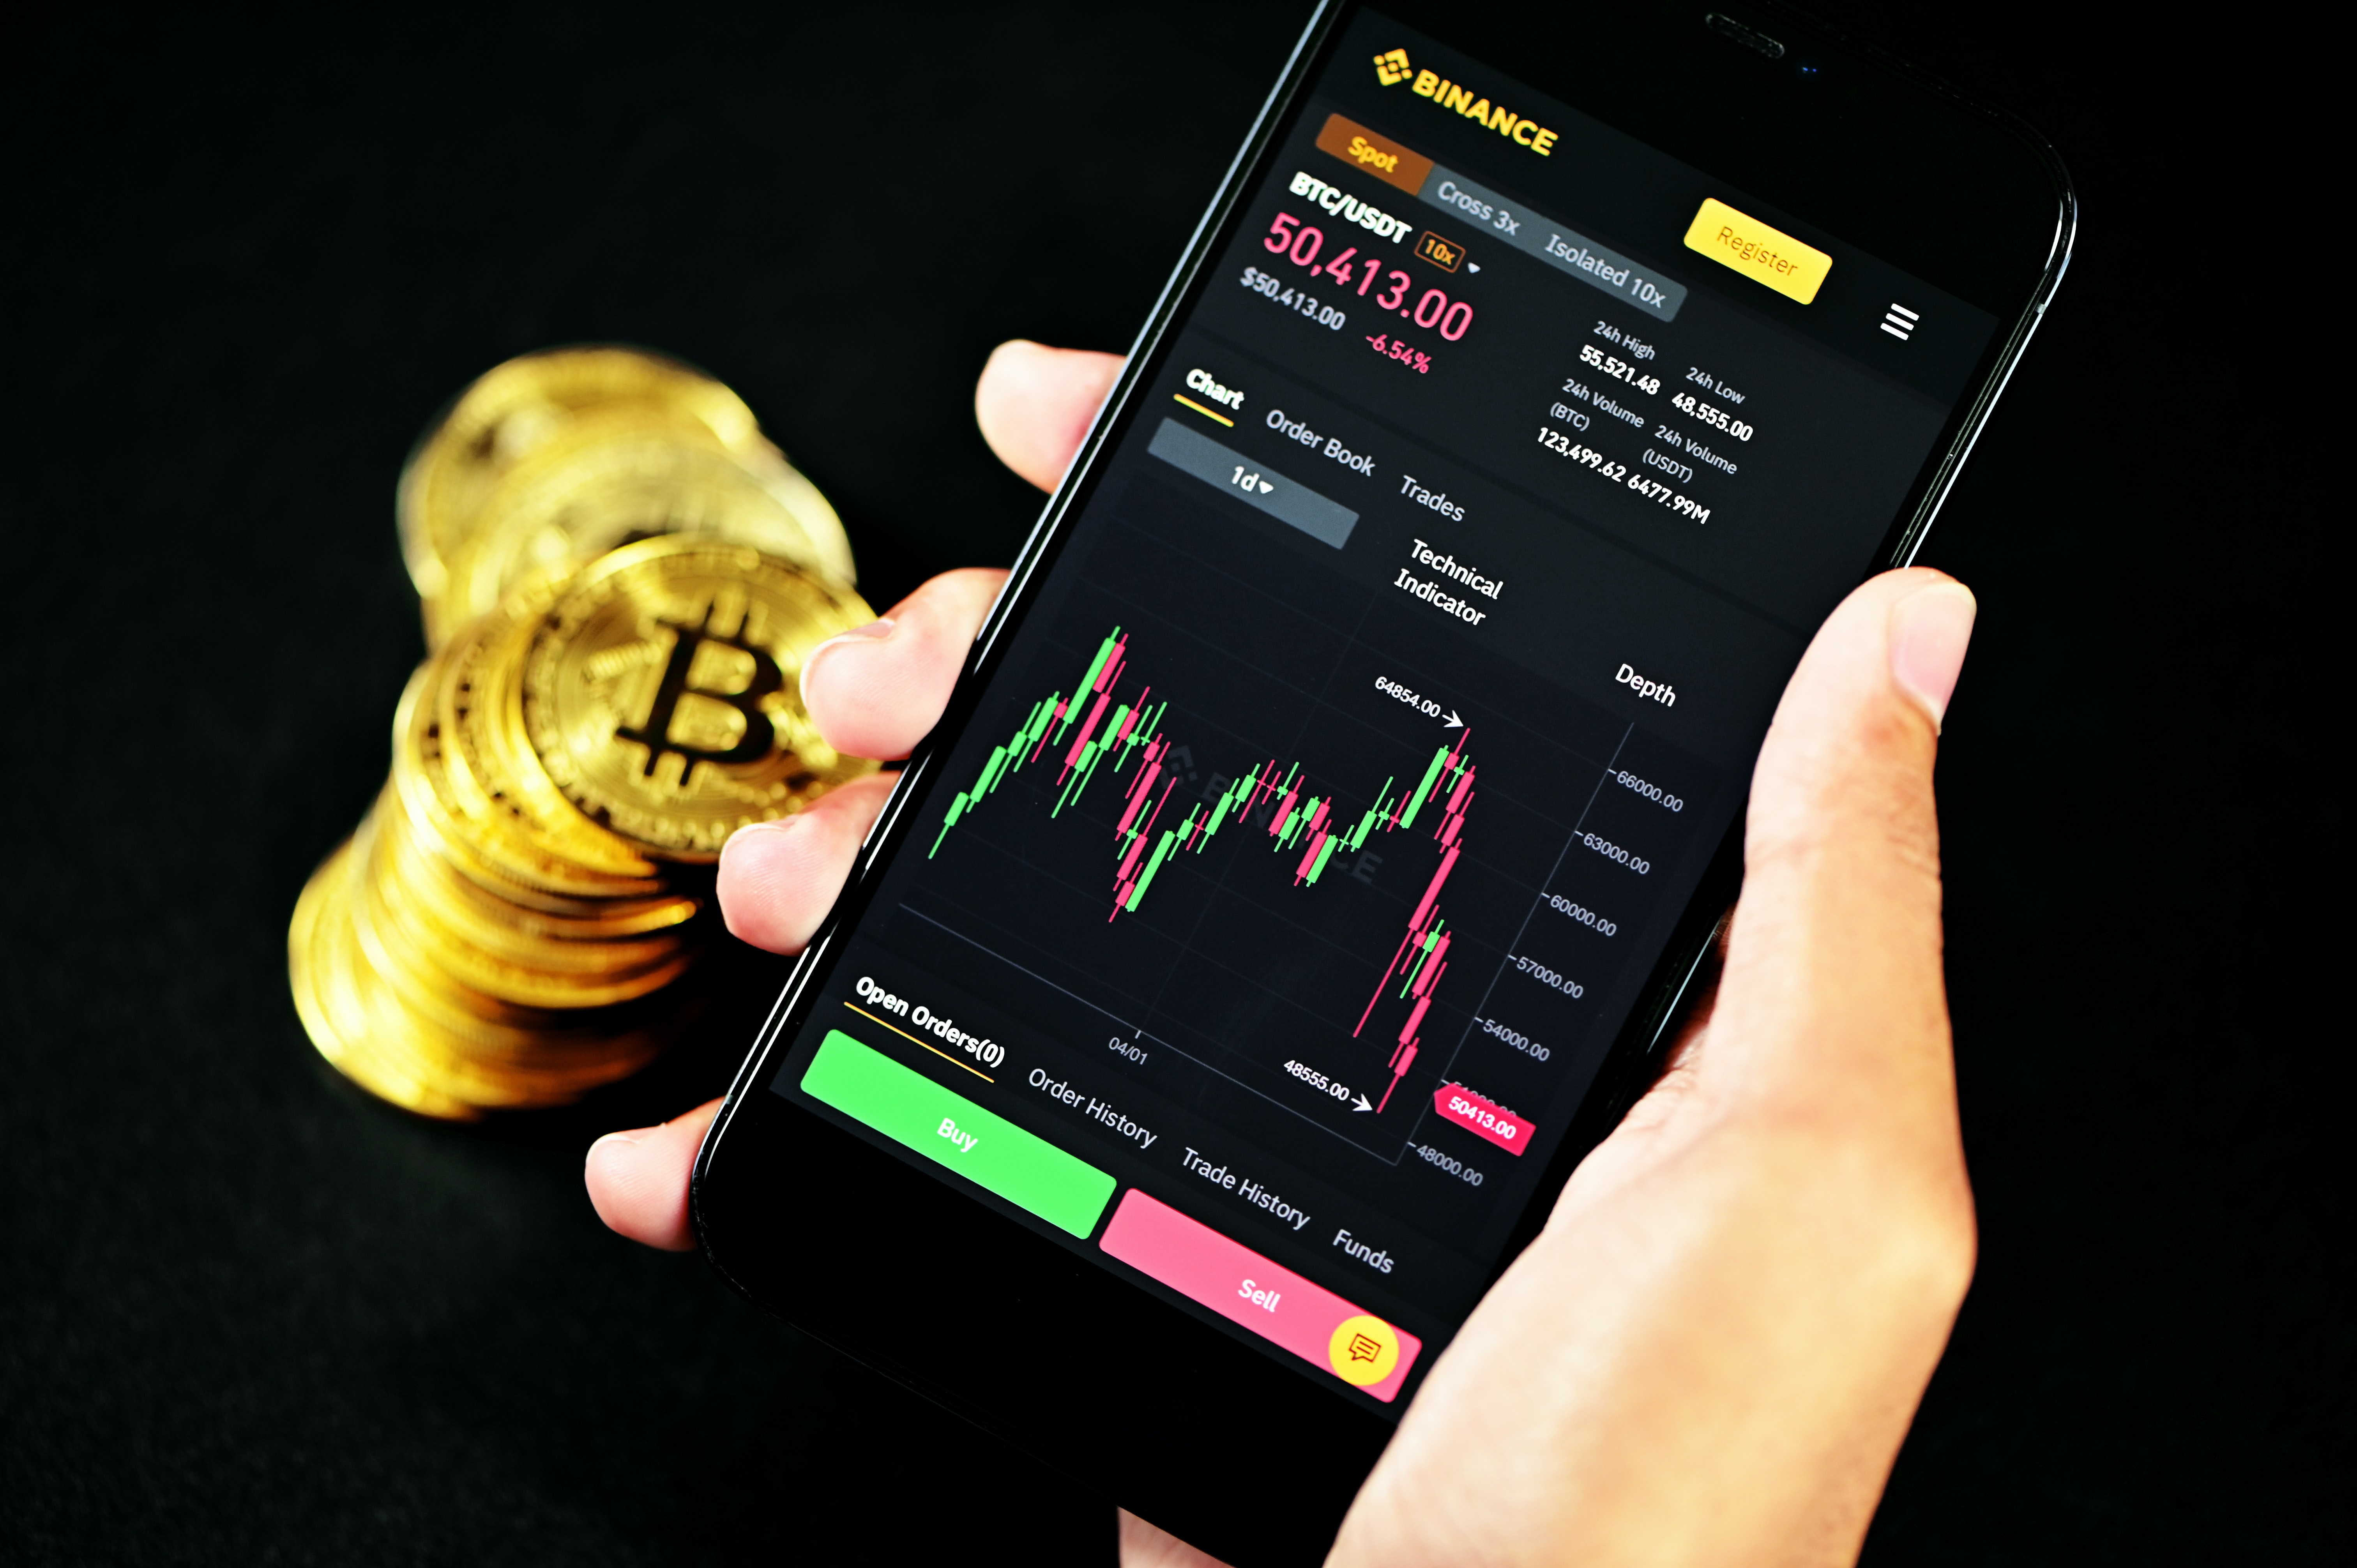 Digital currency market experiences increase, Bitcoin exceeds USD40K threshold